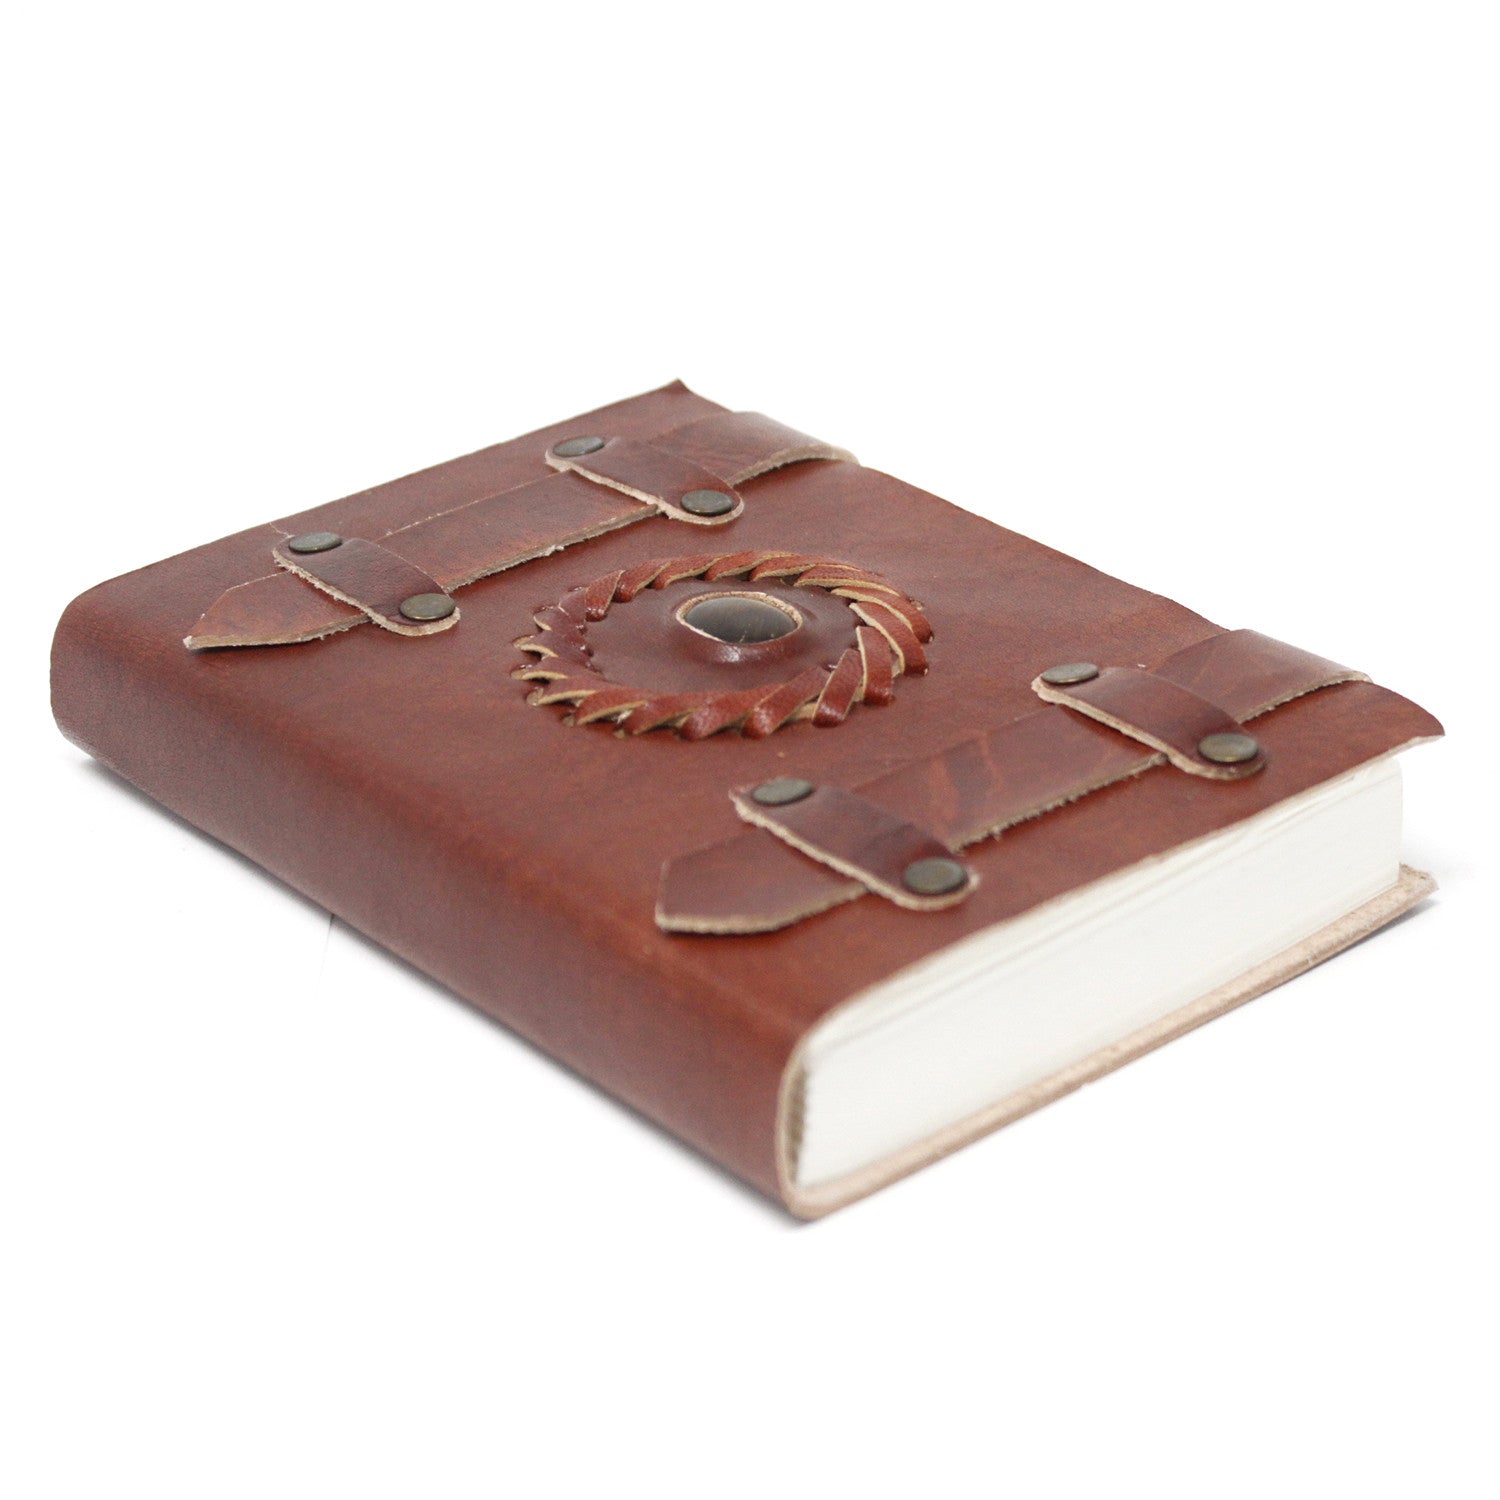 View Leather Tigereye with Belts Notebook 6x4 information